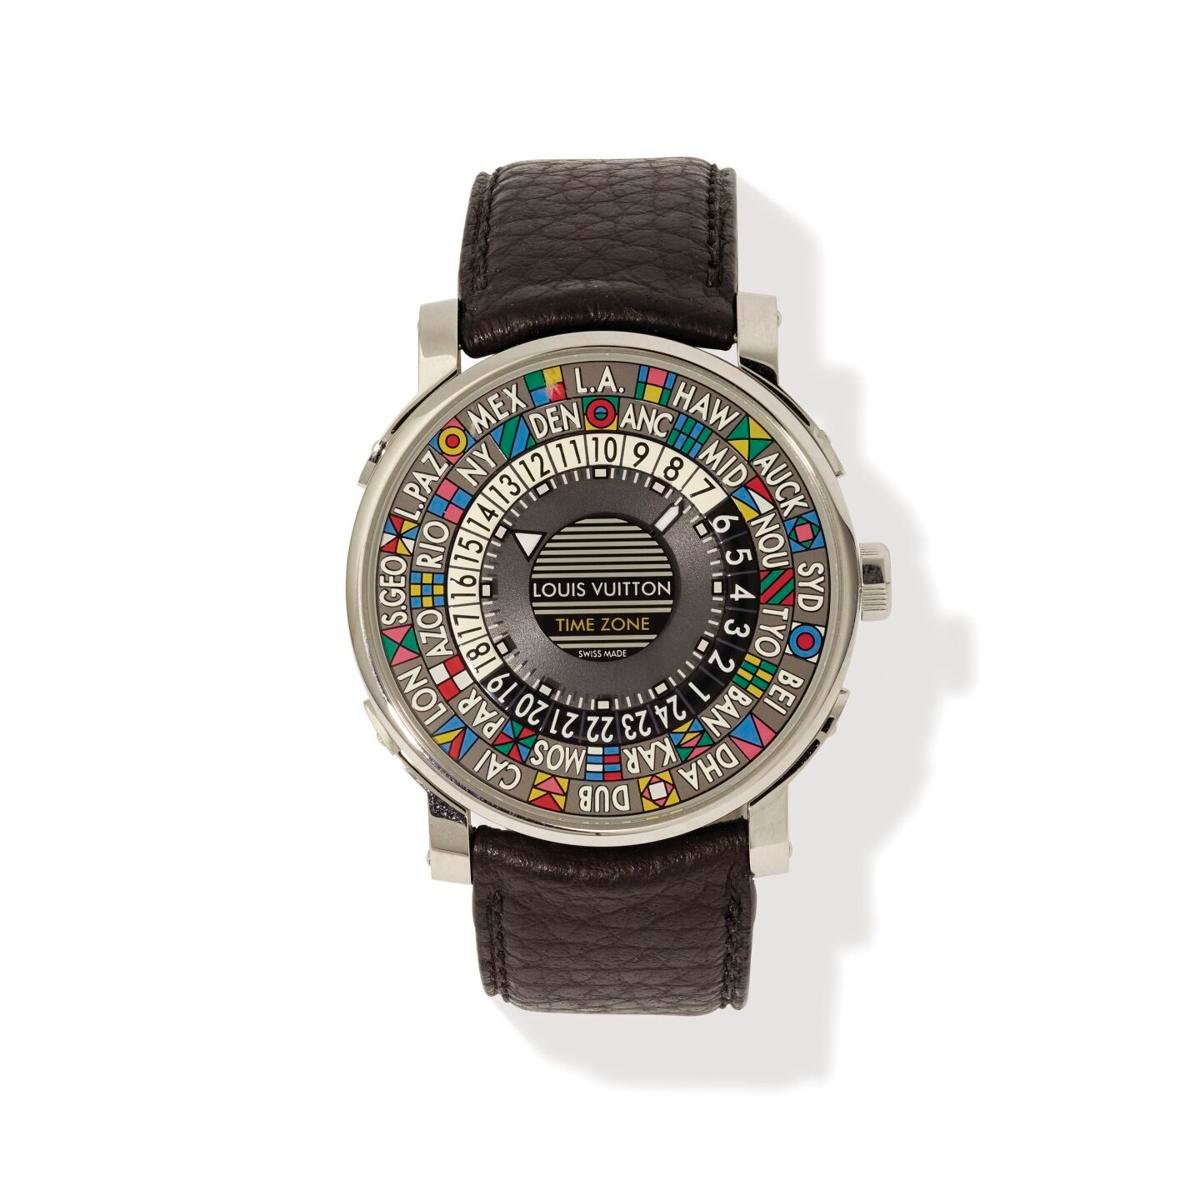 Louis Vuitton watch features 24 time zones, Lifestyles